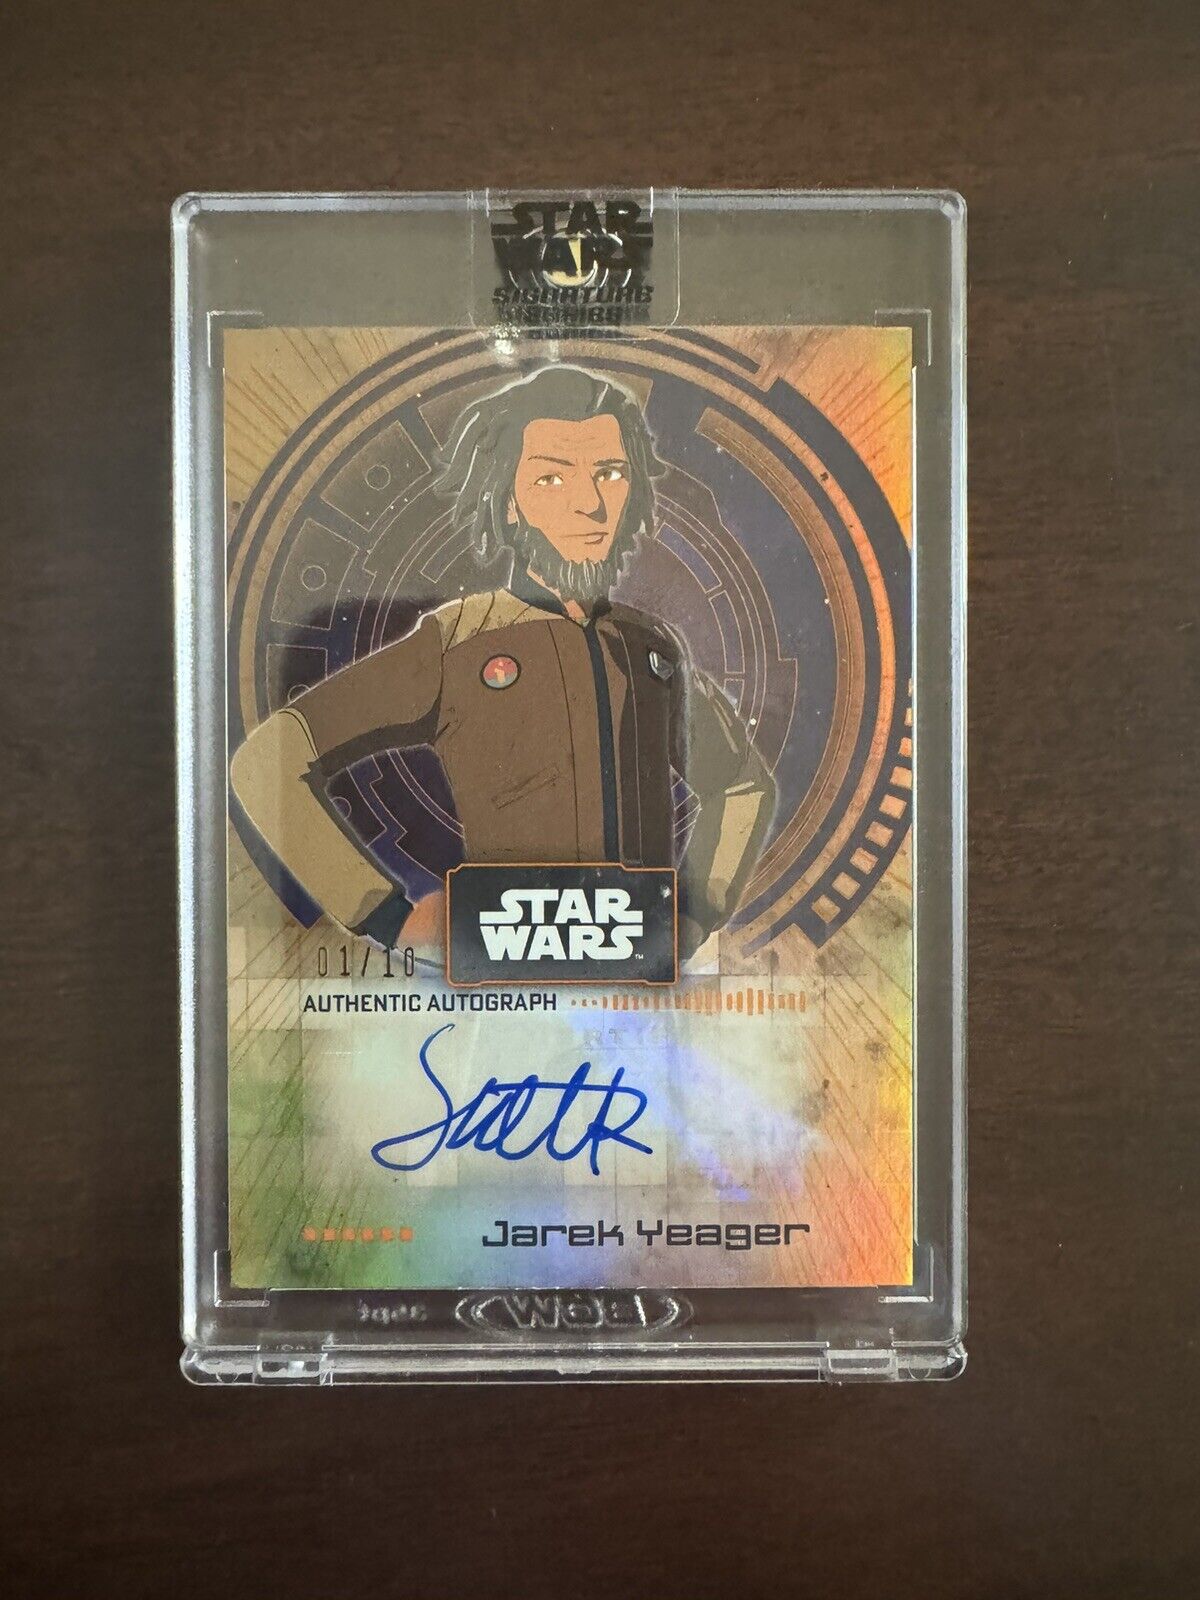 2022 Topps Star Wars Signature Series Auto Scott Lawrence as Jarek Yeager 1/10